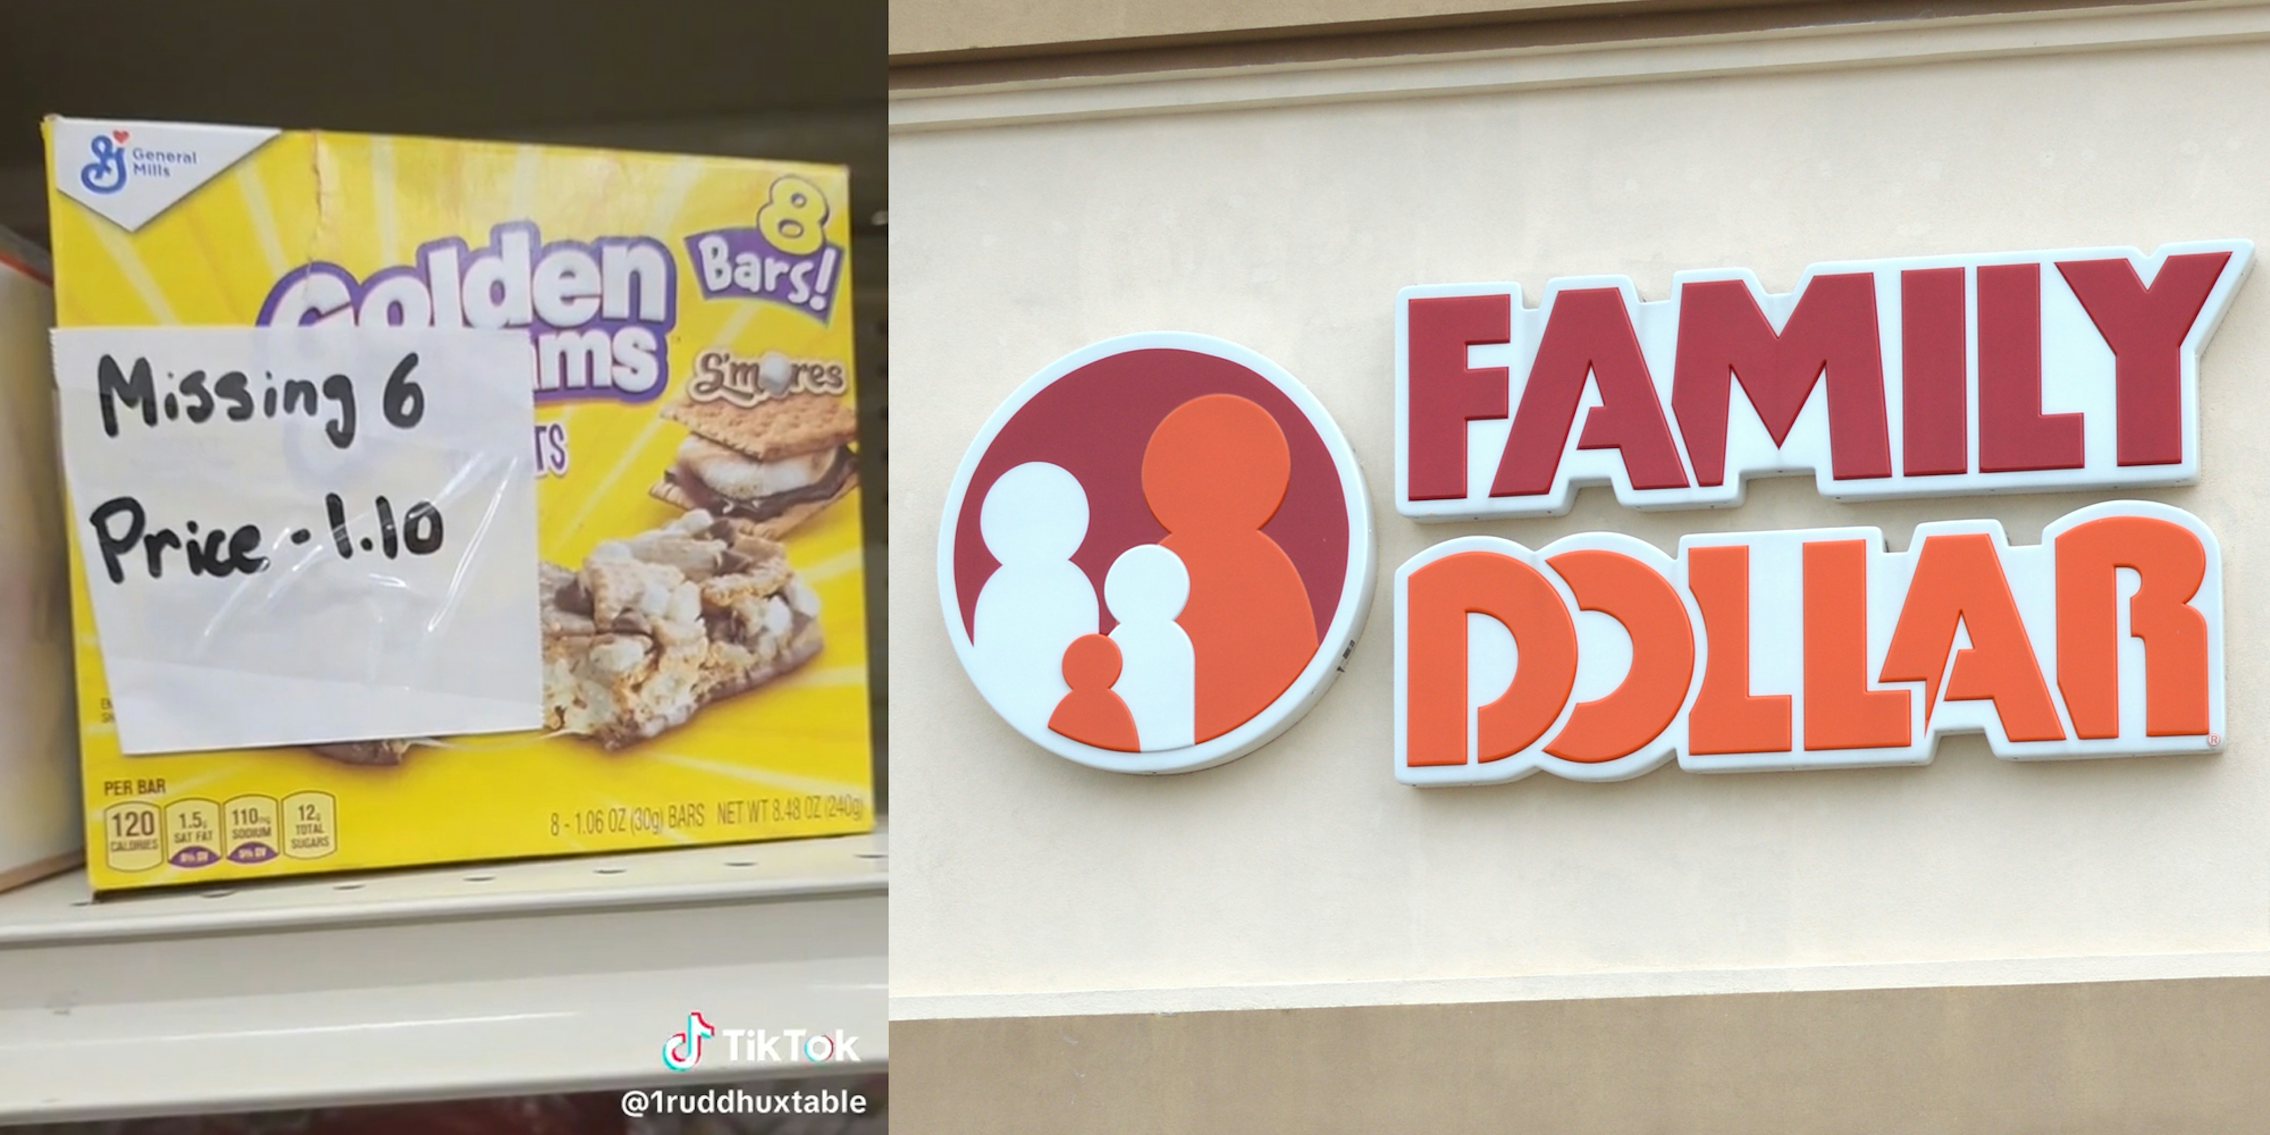 golden grahams bars with taped note that reads 'missing 6 price - 1.10' (l) Family Dollar storefront (r)